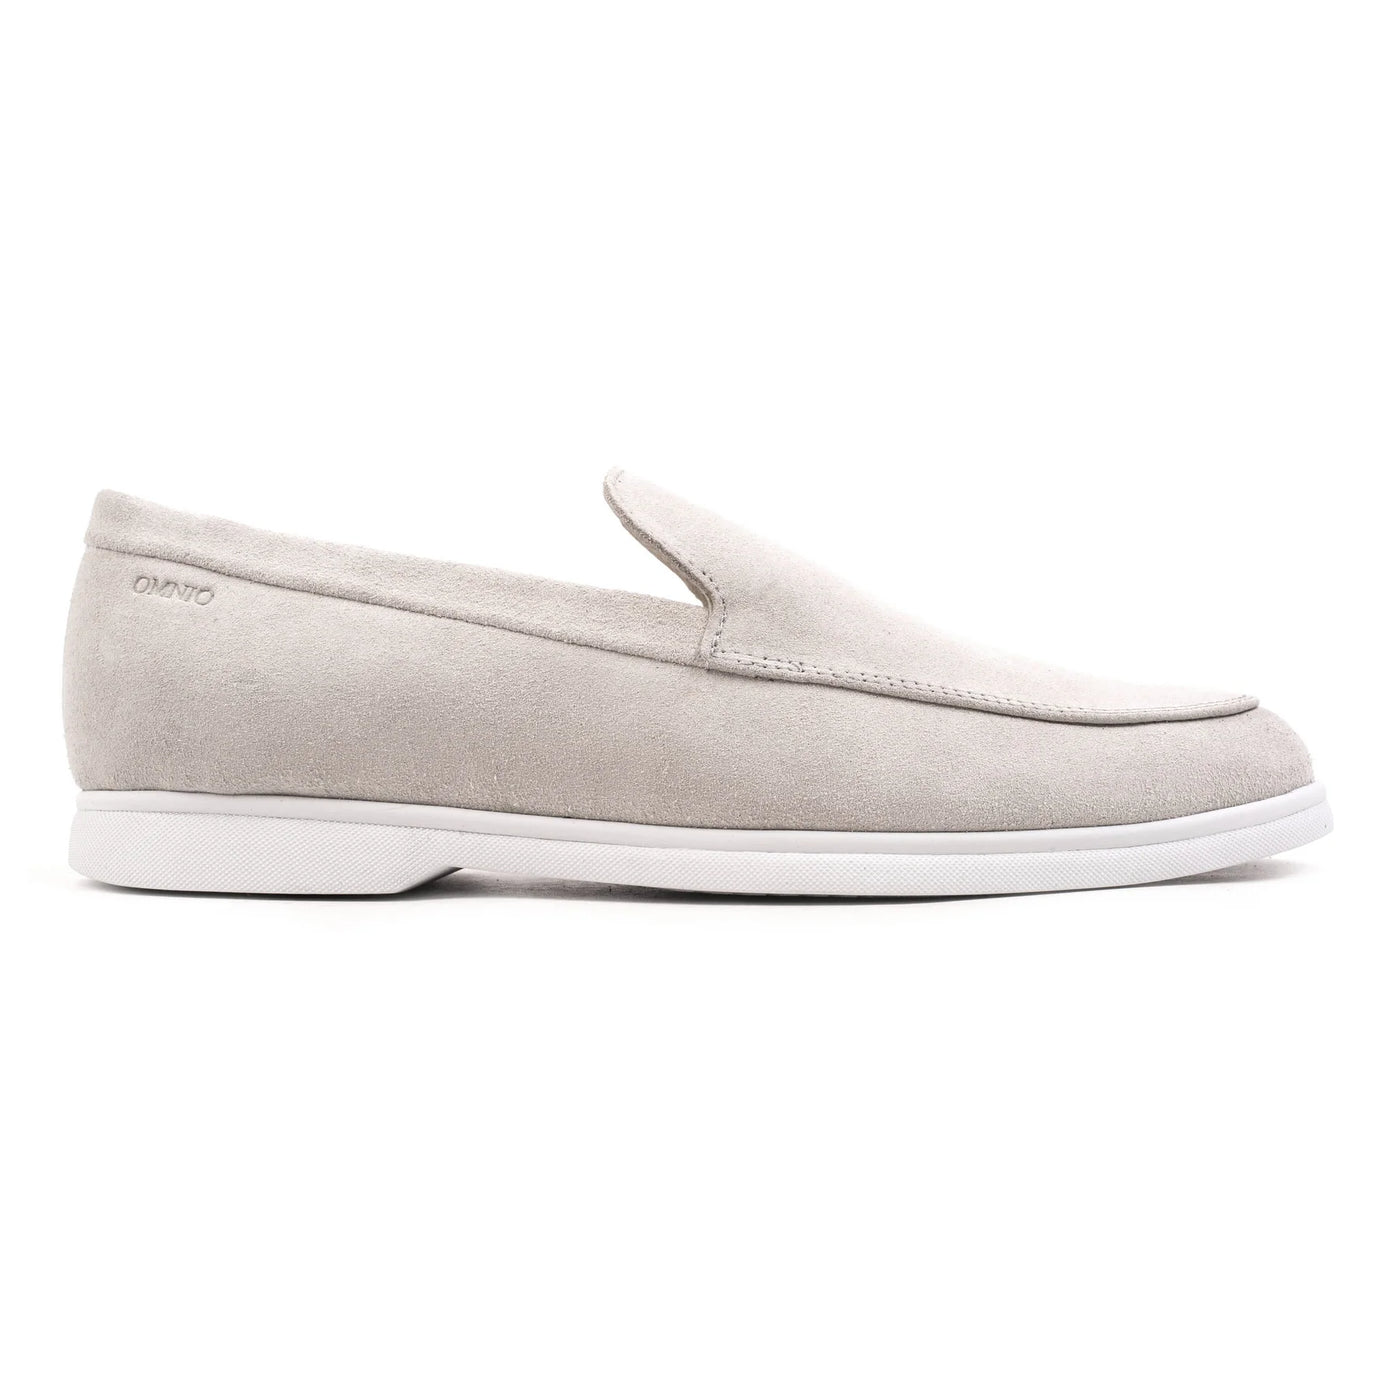 ACE LOAFER Beige Suede - HINSON